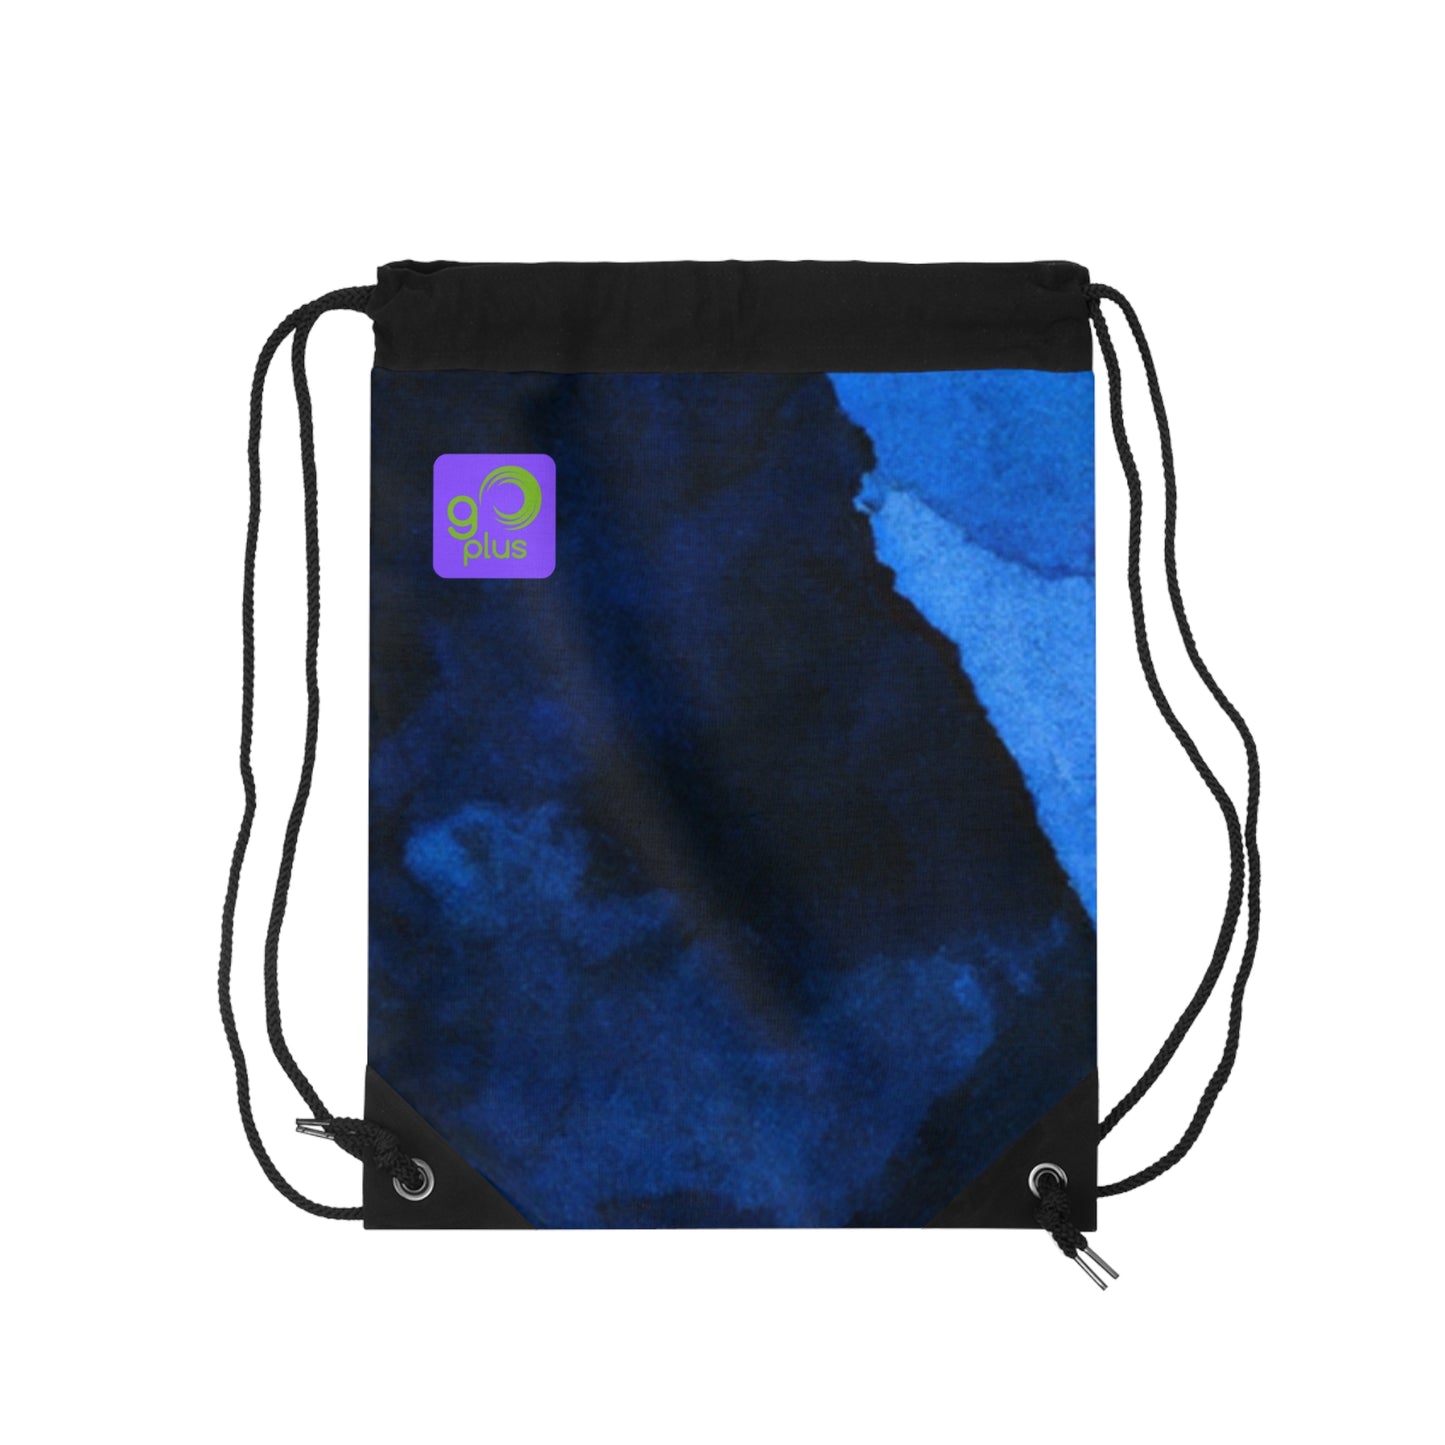 "The Thrill of the Game: An Exciting Digital Art Adventure" - Go Plus Drawstring Bag